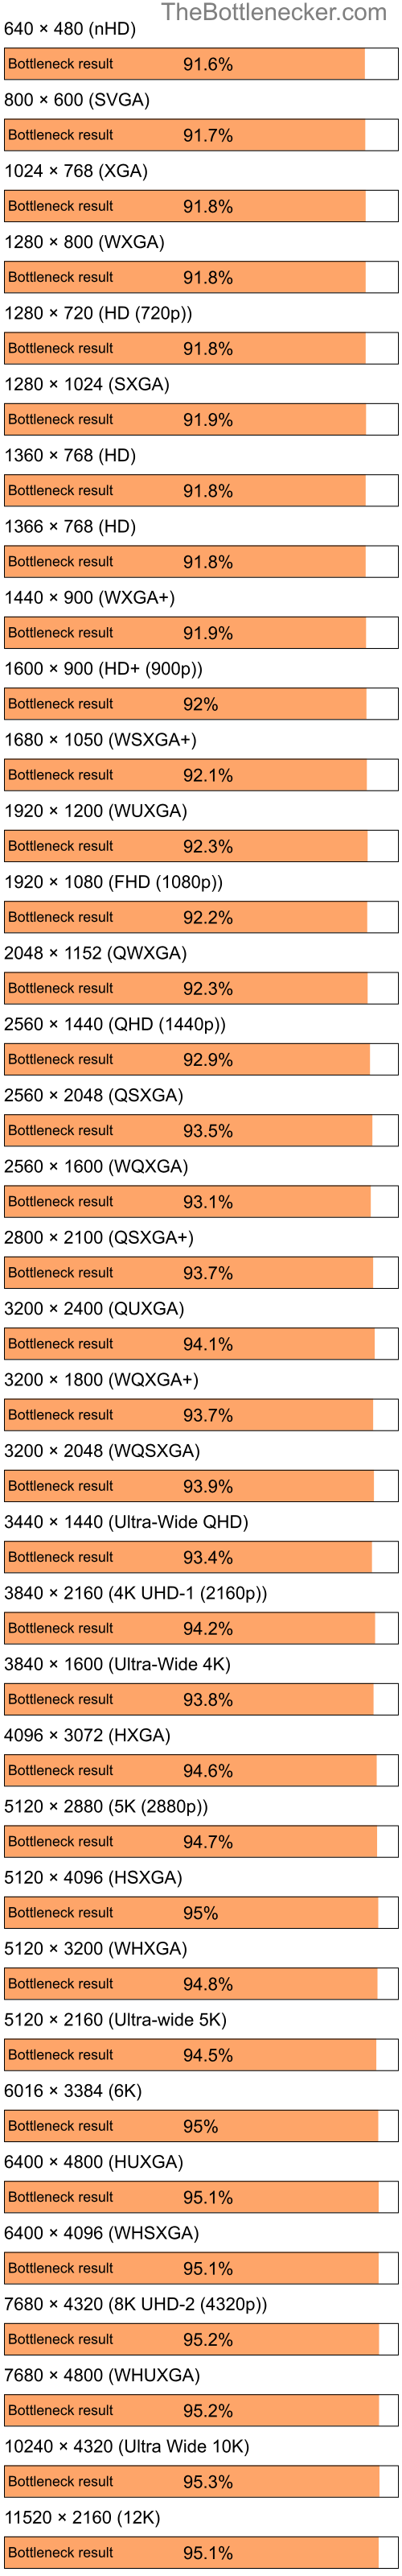 Bottleneck results by resolution for Intel Atom Z520 and AMD Mobility Radeon 9200 in7 Days to Die